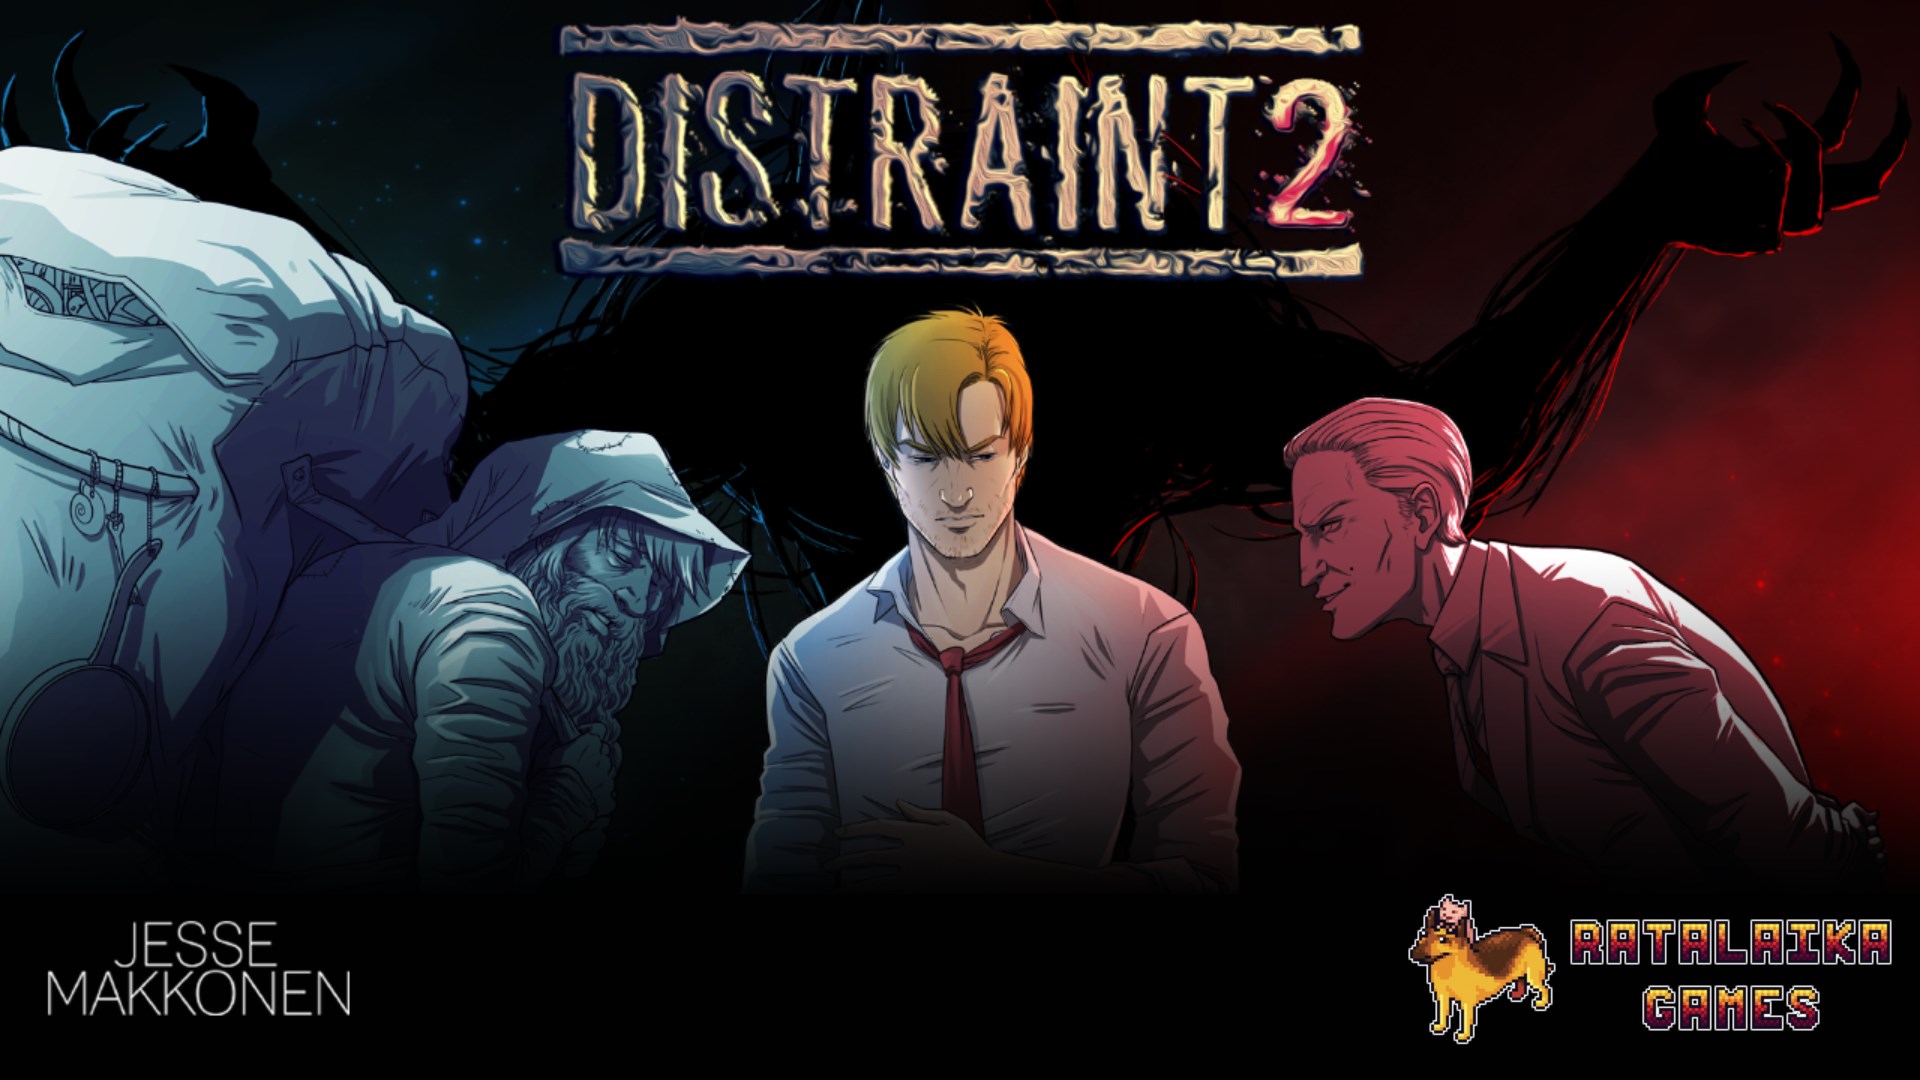 Video For DISTRAINT 2 Is Now Available For Xbox One